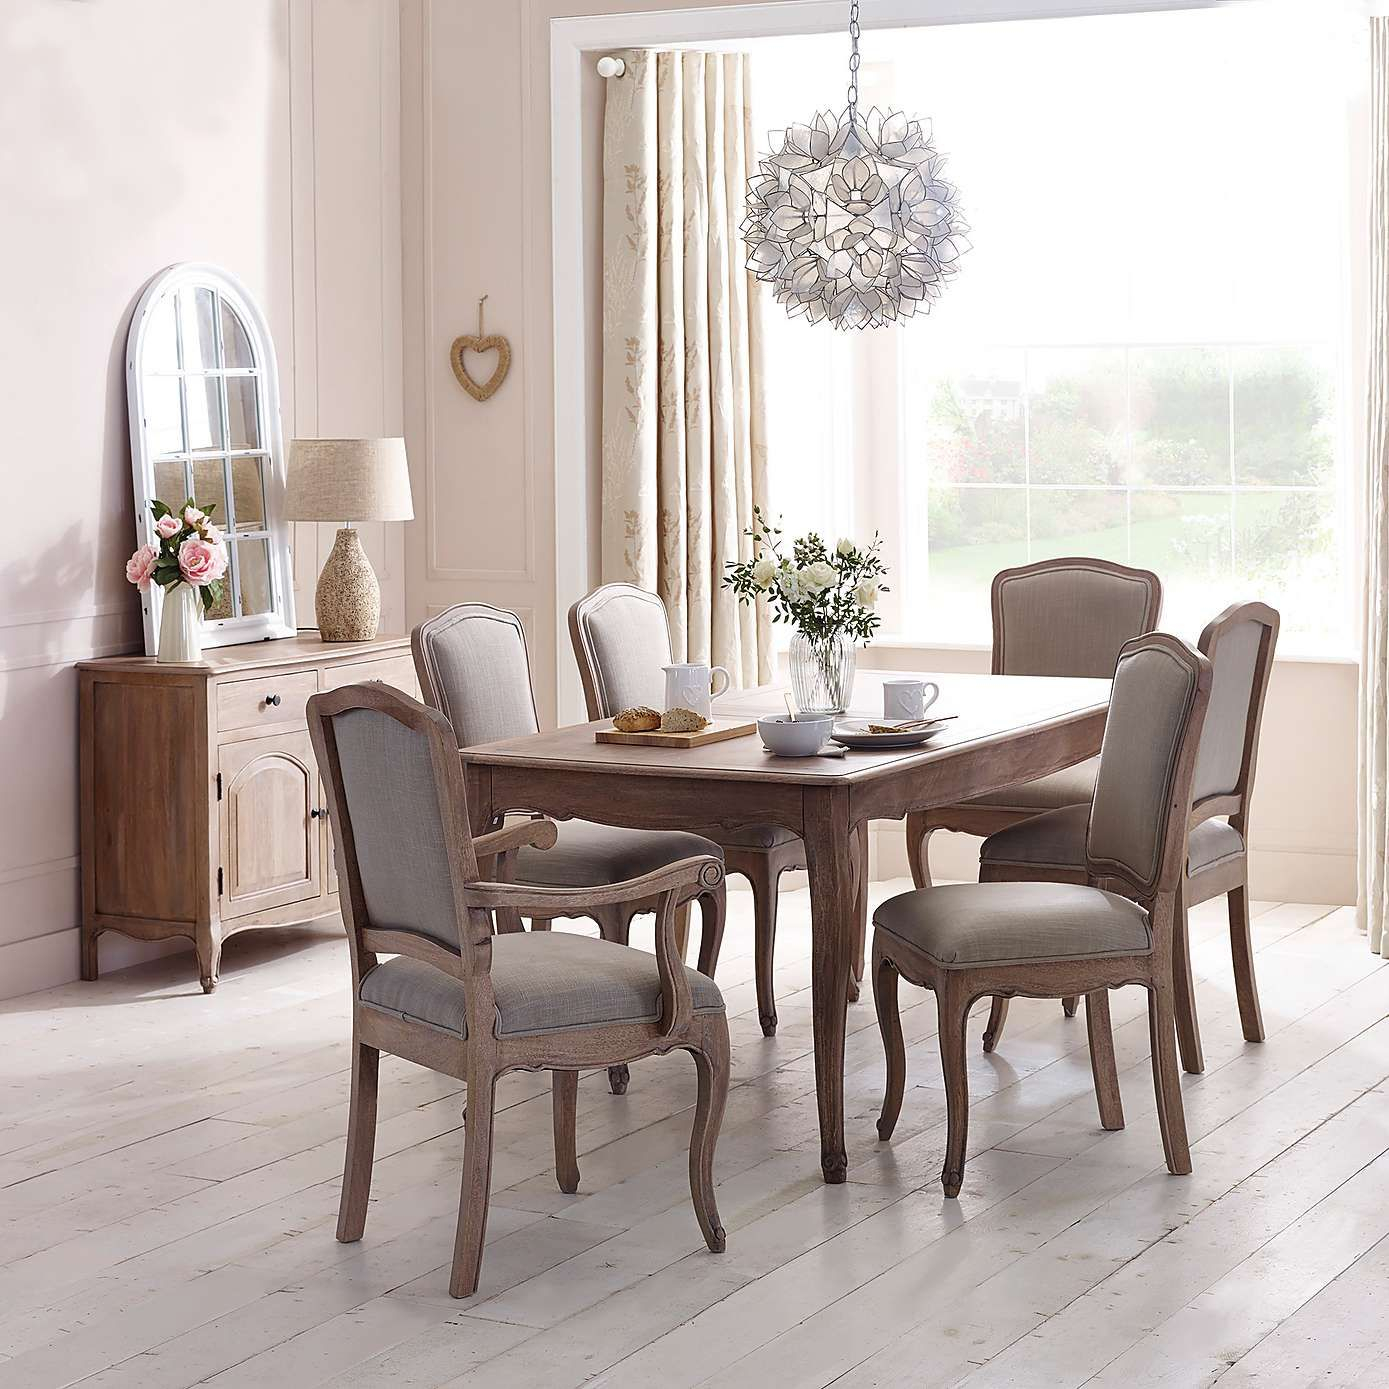 Amelie Extending Dining Table Beauchamp House Extendable within sizing 1389 X 1389